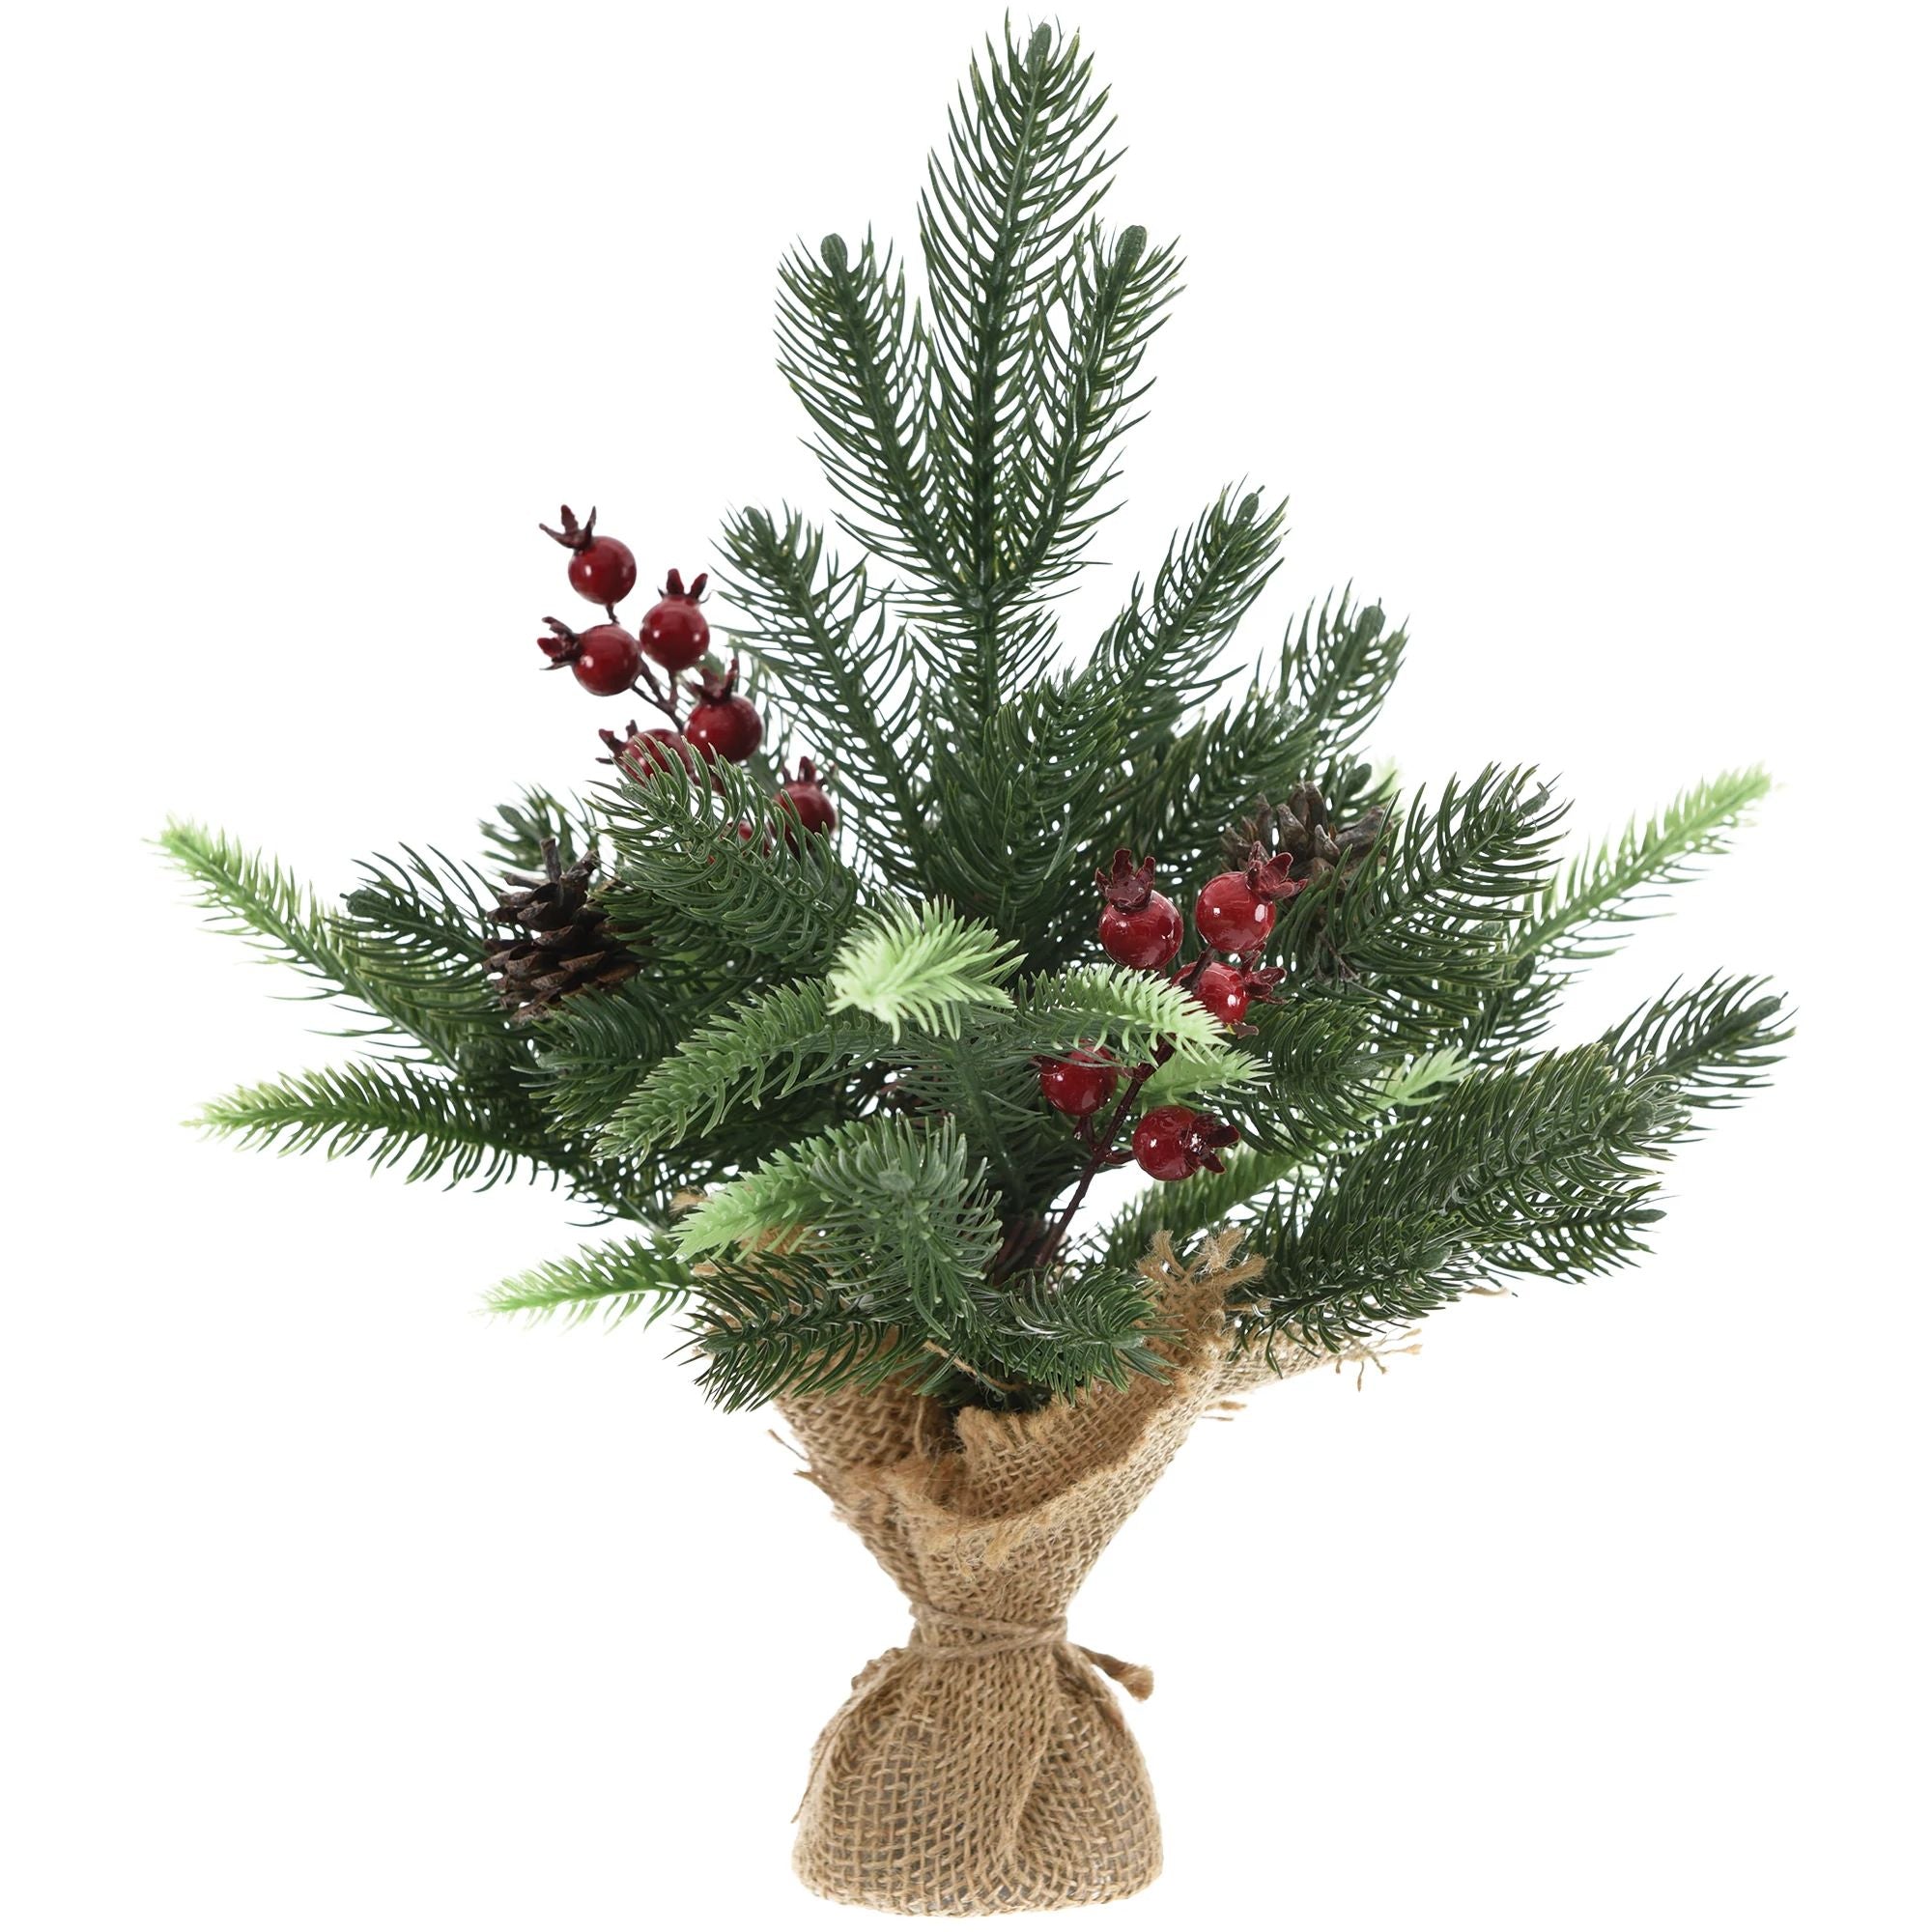 Amscan HOLIDAY: NEW YEAR'S Faux Pine Tabletop Décor, 14"